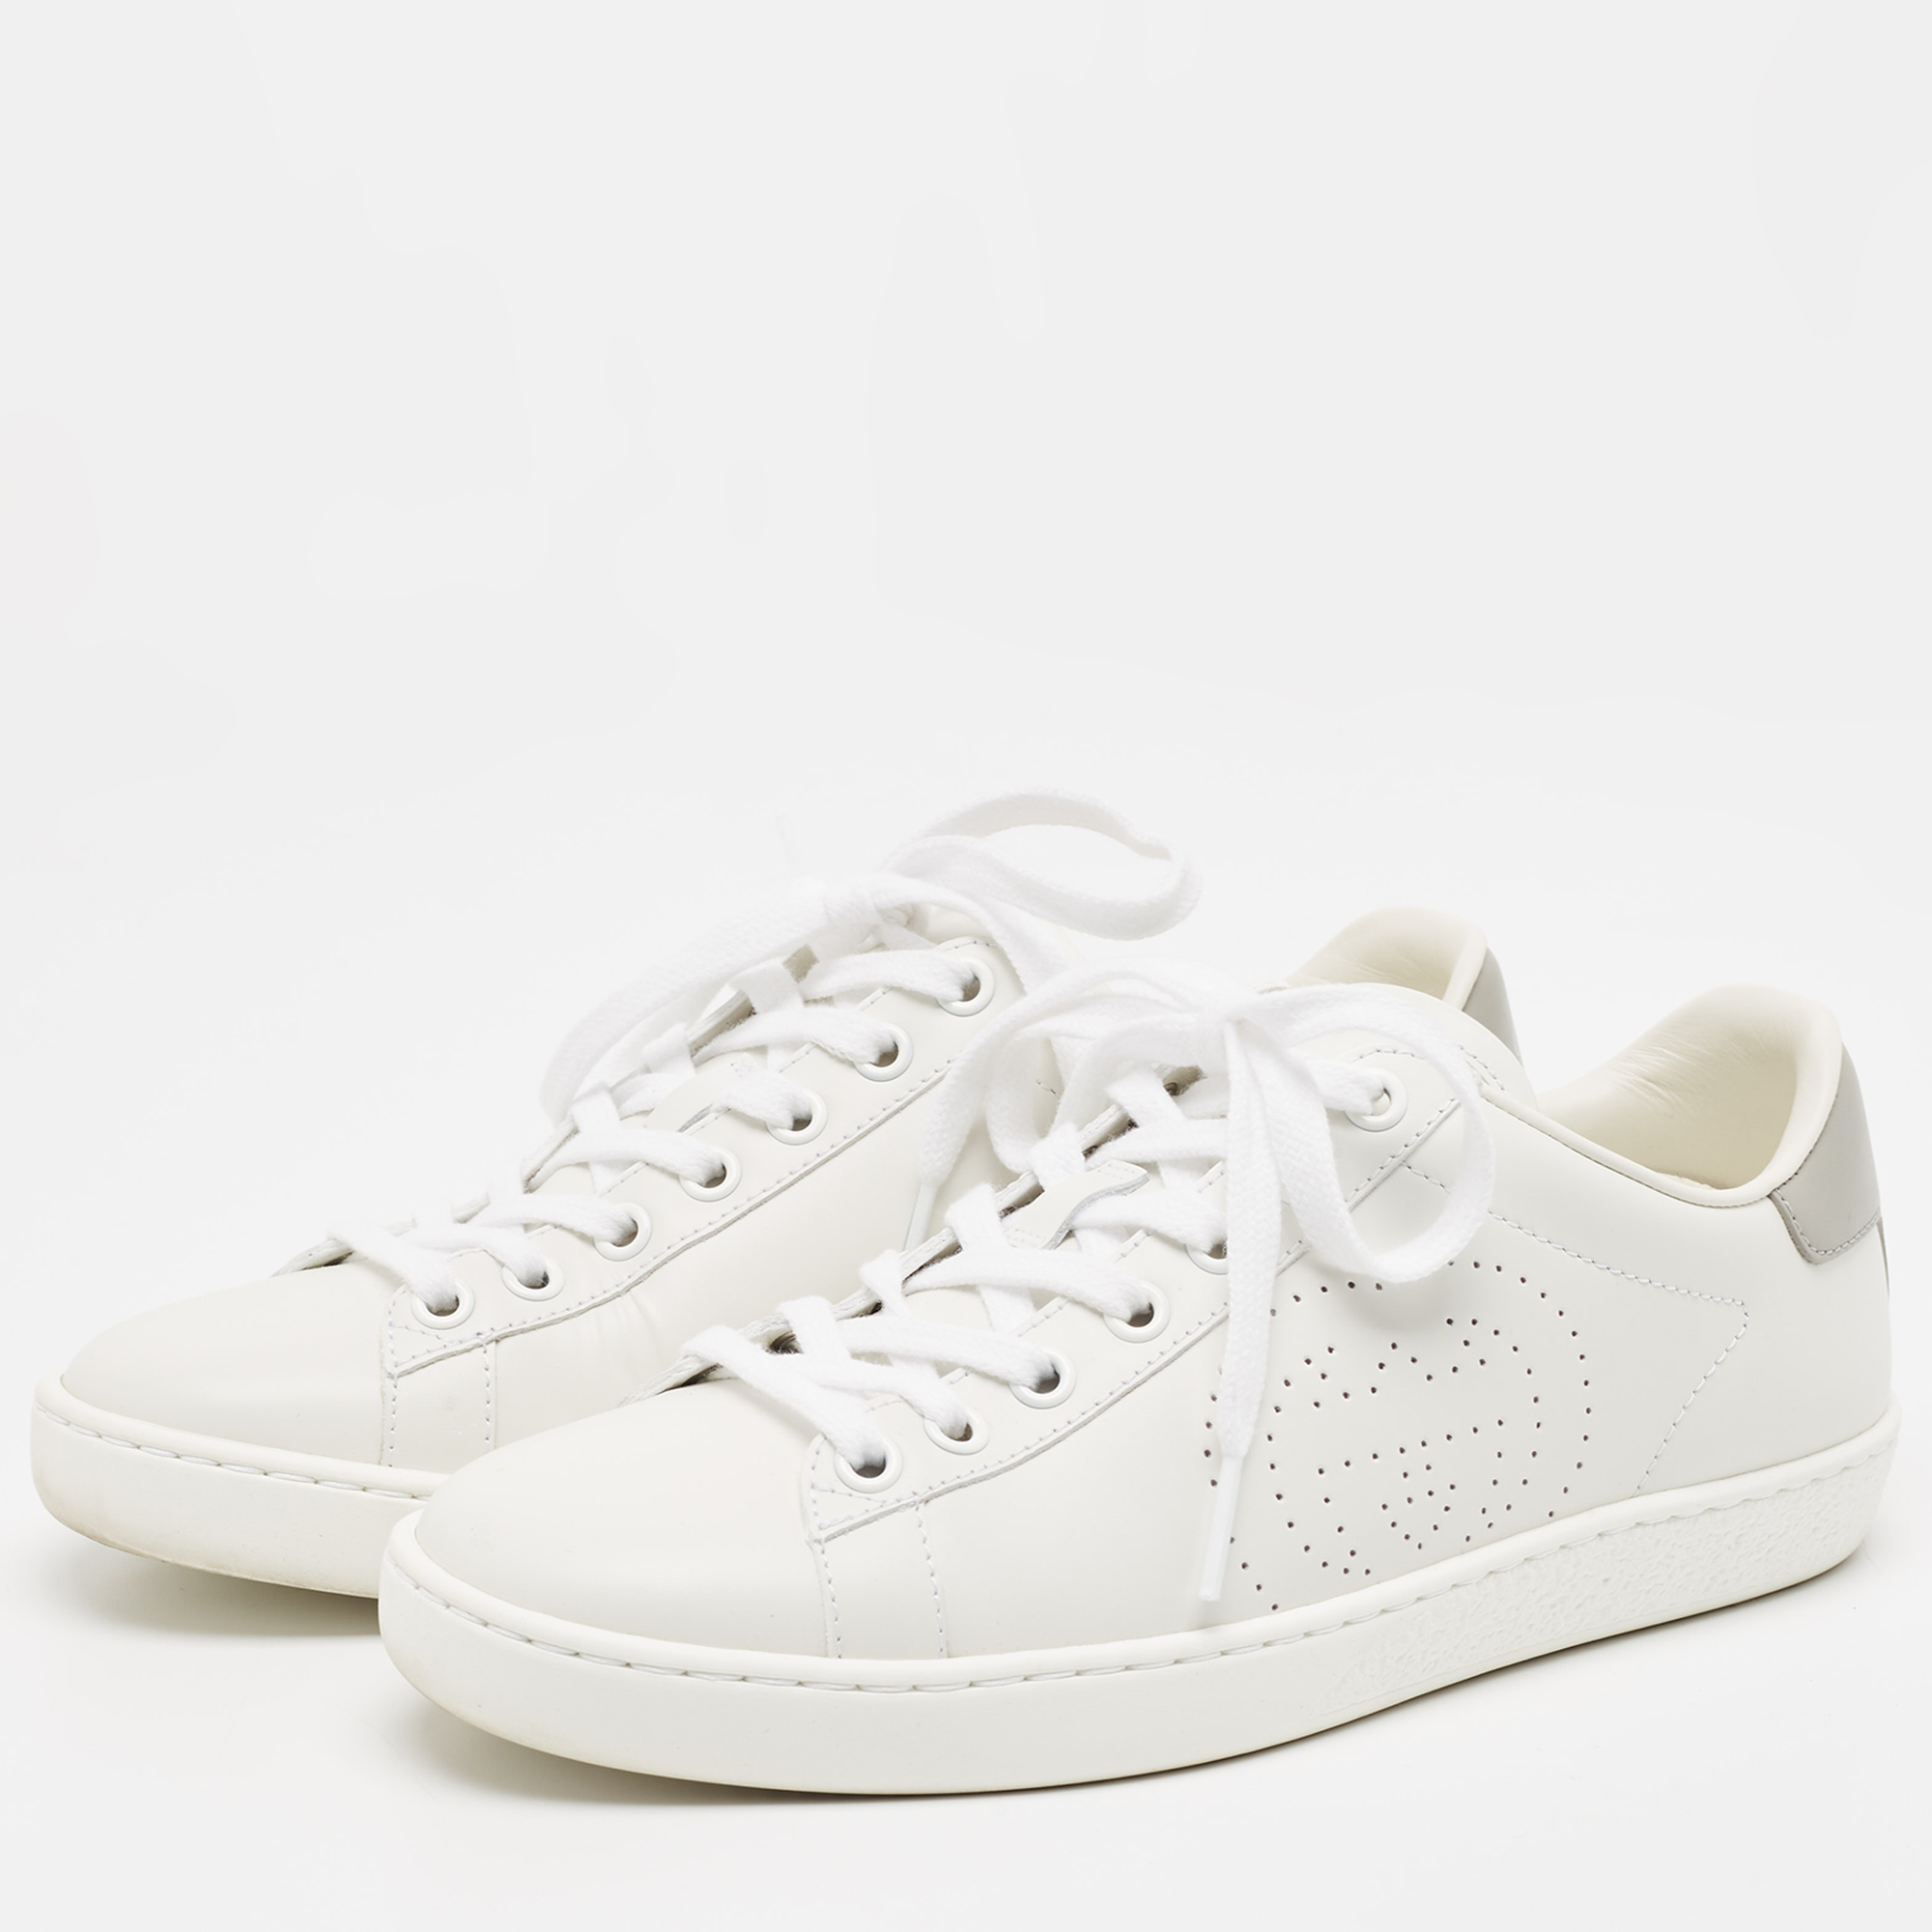 

Gucci White/Grey Leather Interlocking G Ace Sneakers Size